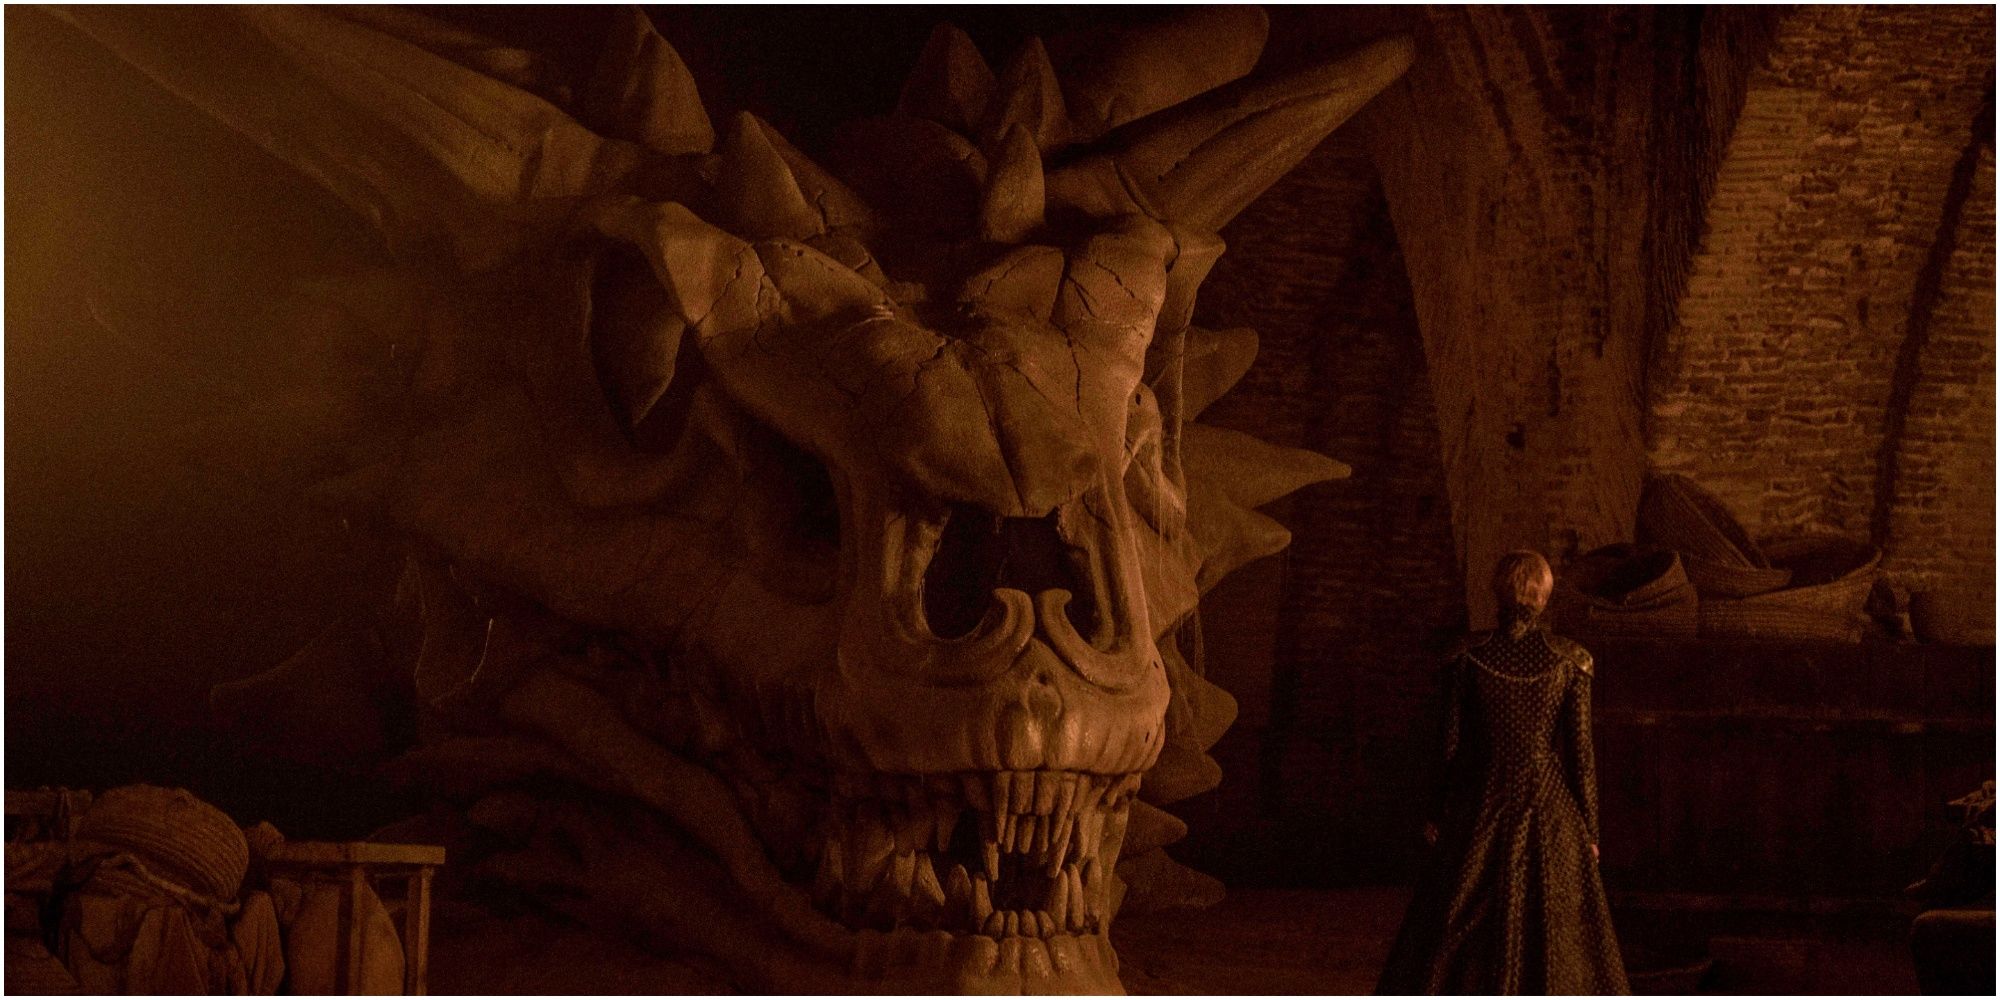 Cersei Lannister stands in front of Balerion's skull in Game of Thrones.